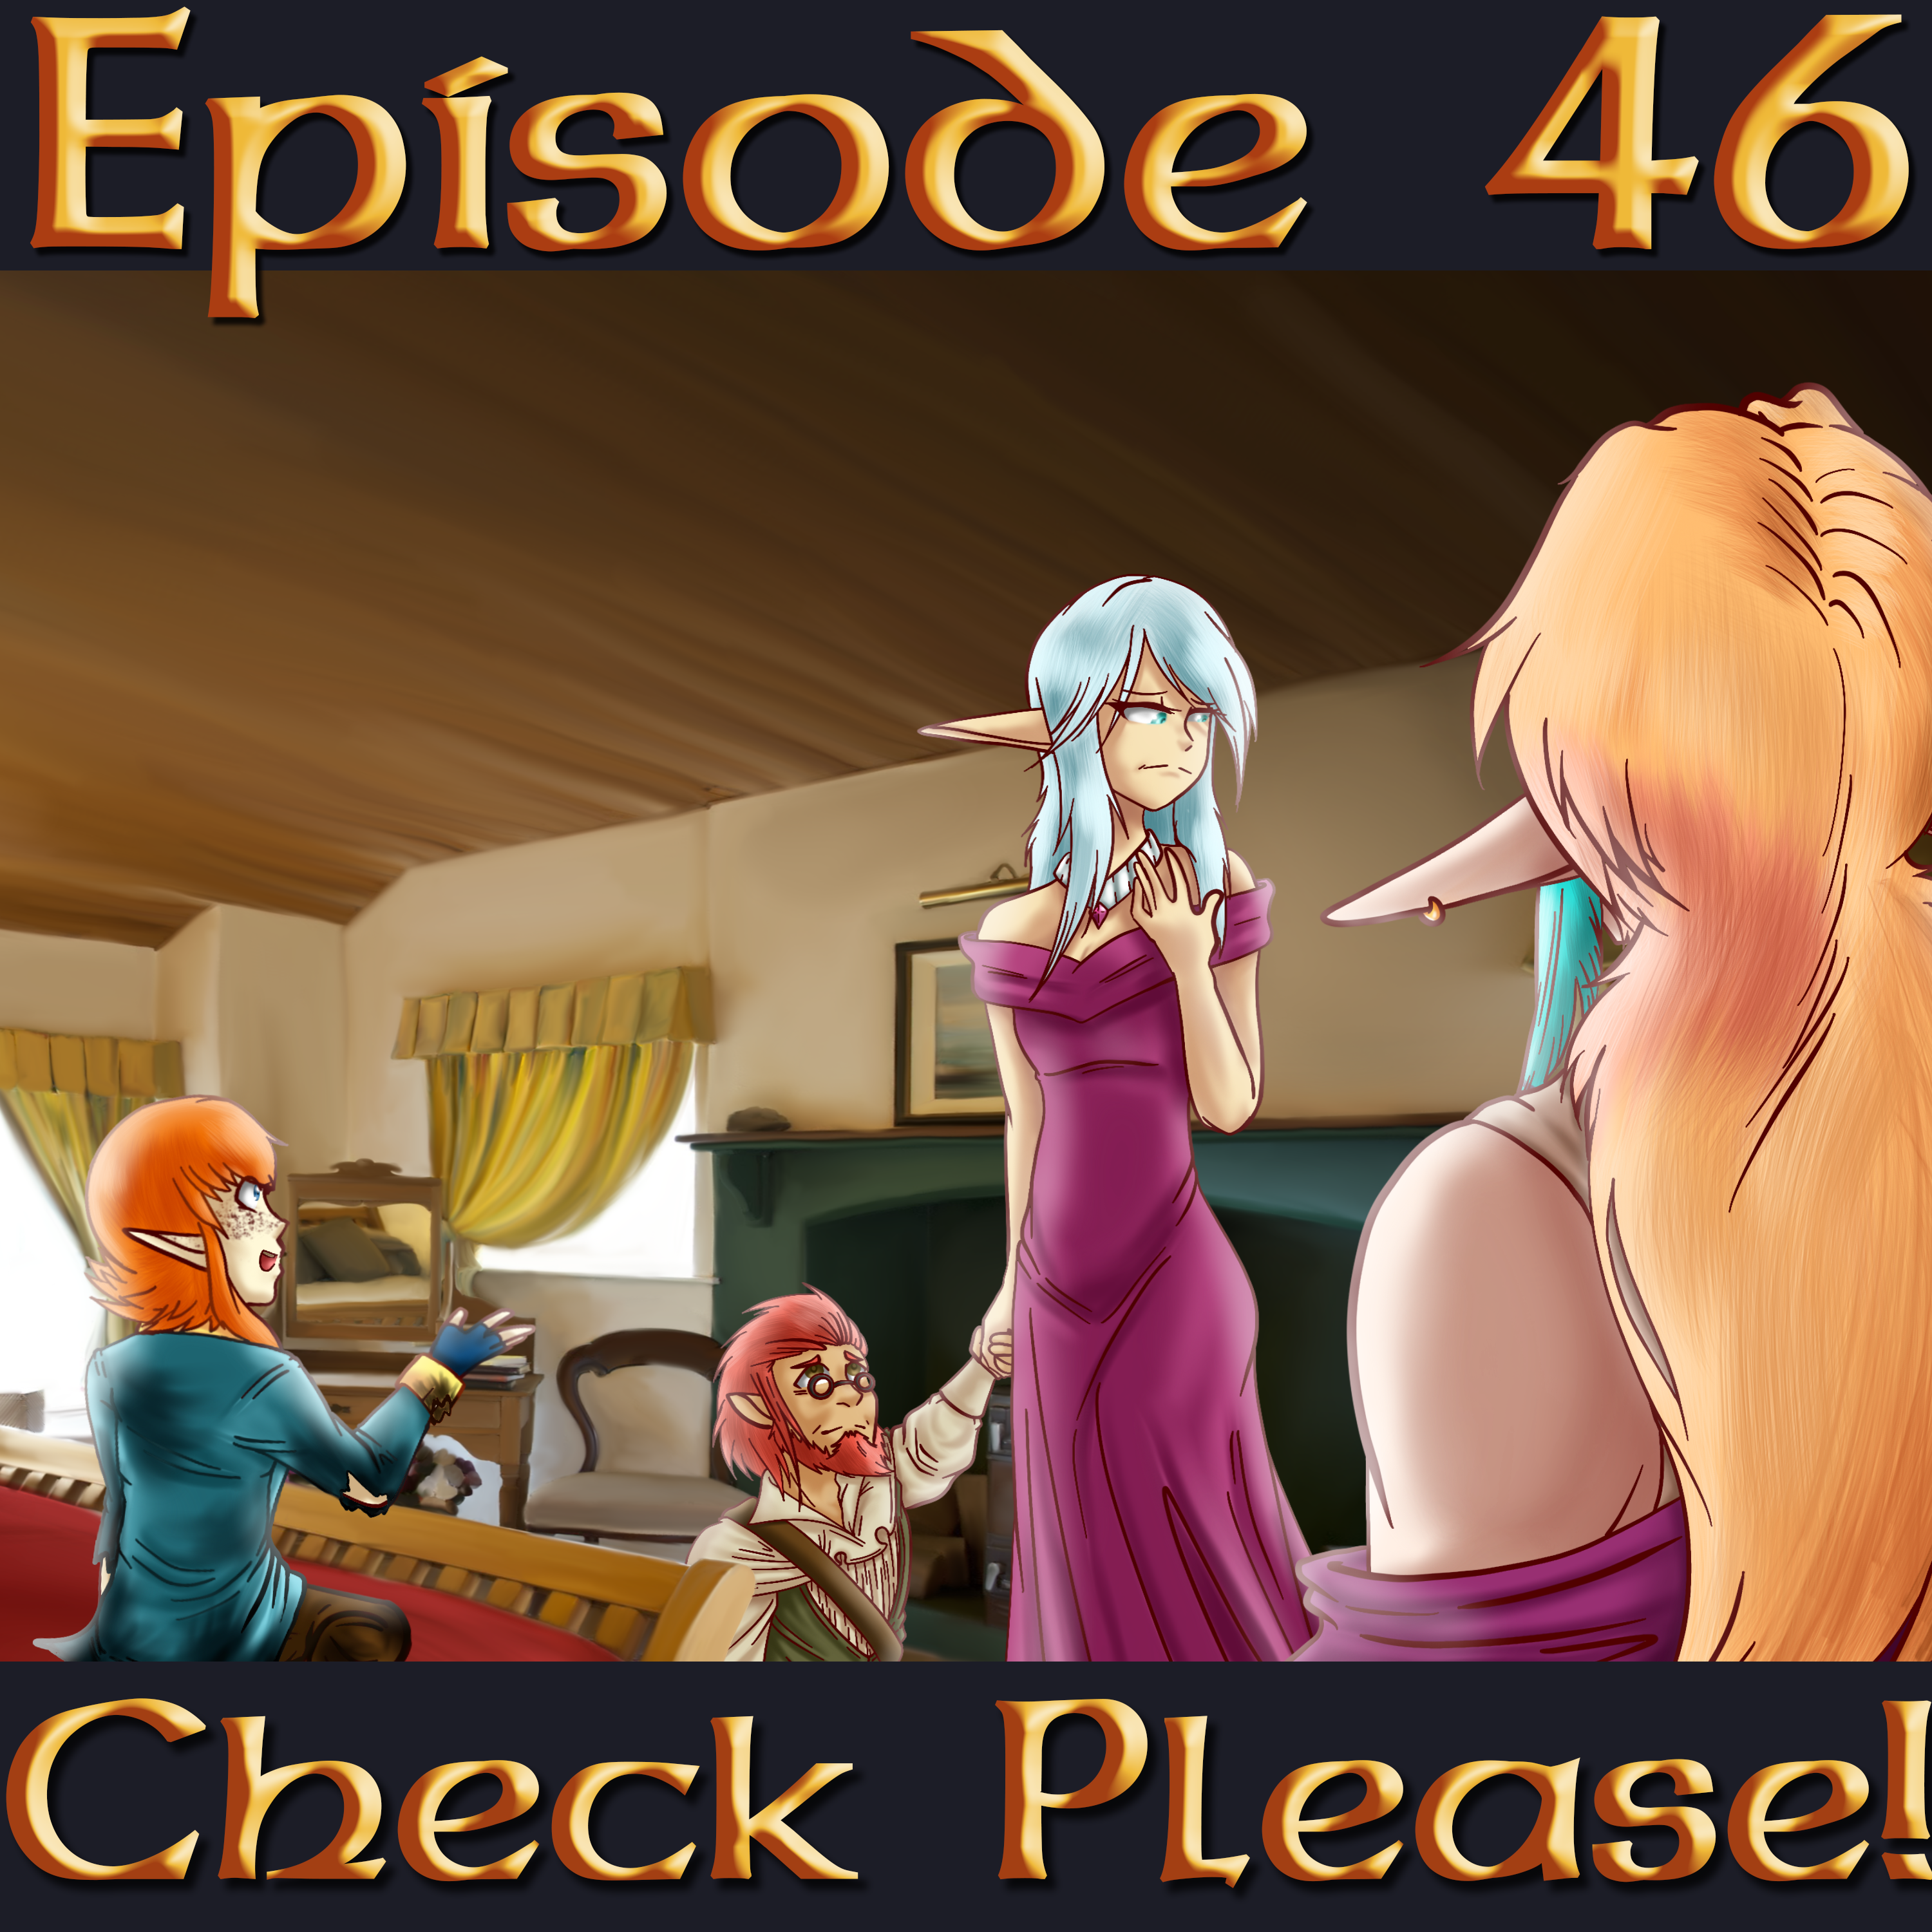 Check Please! S1 E46: Protection or Lies